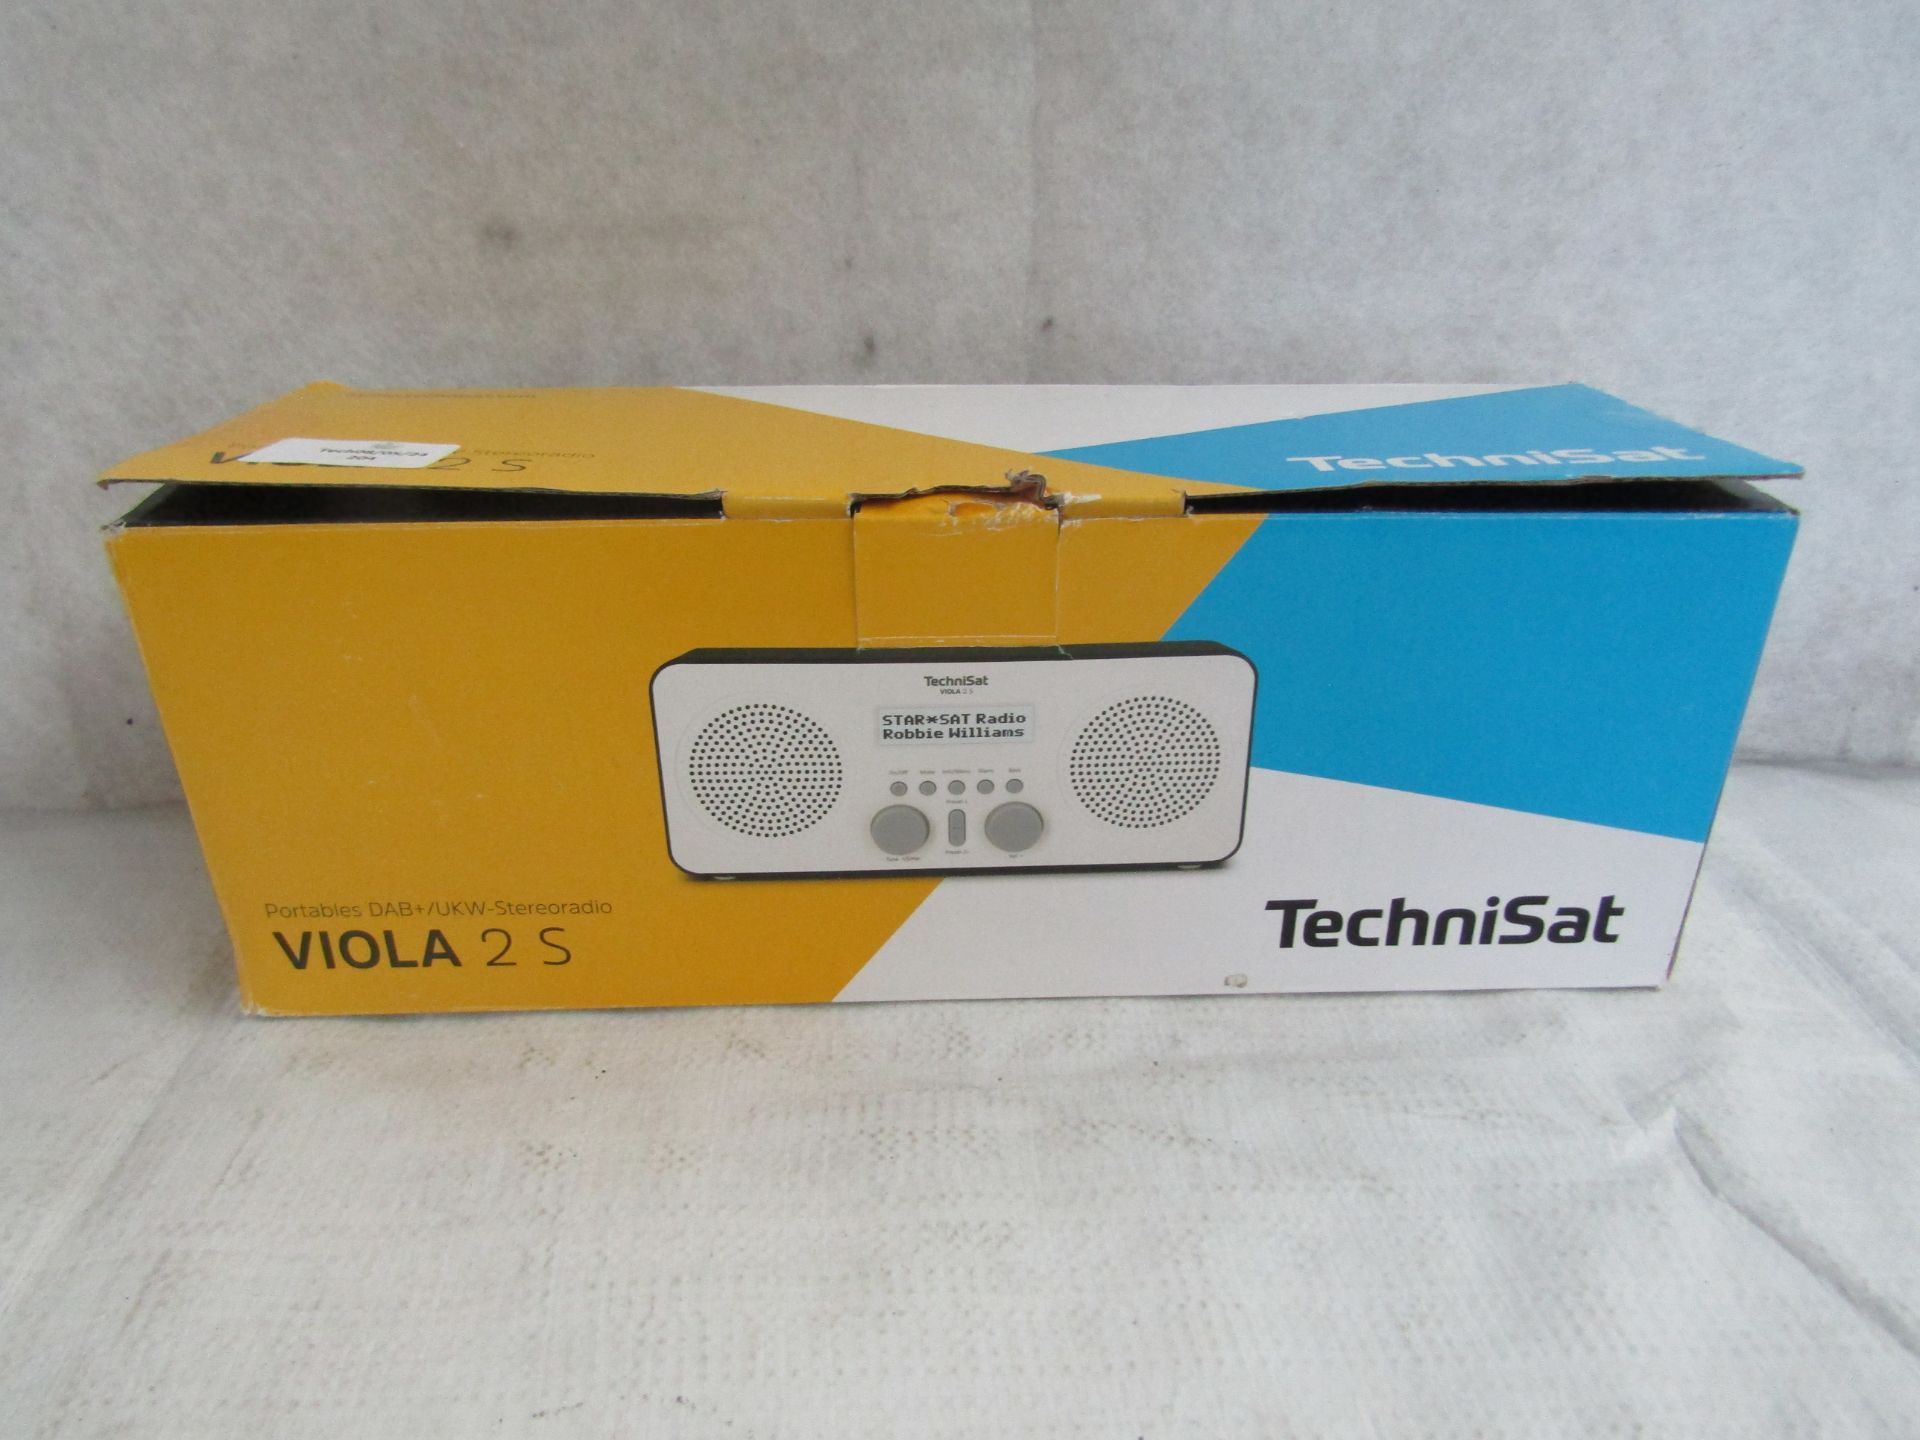 Techniset Viola 2 s Portable Dab Stereo Radio, Unchecked & Boxed. RRP £19.99